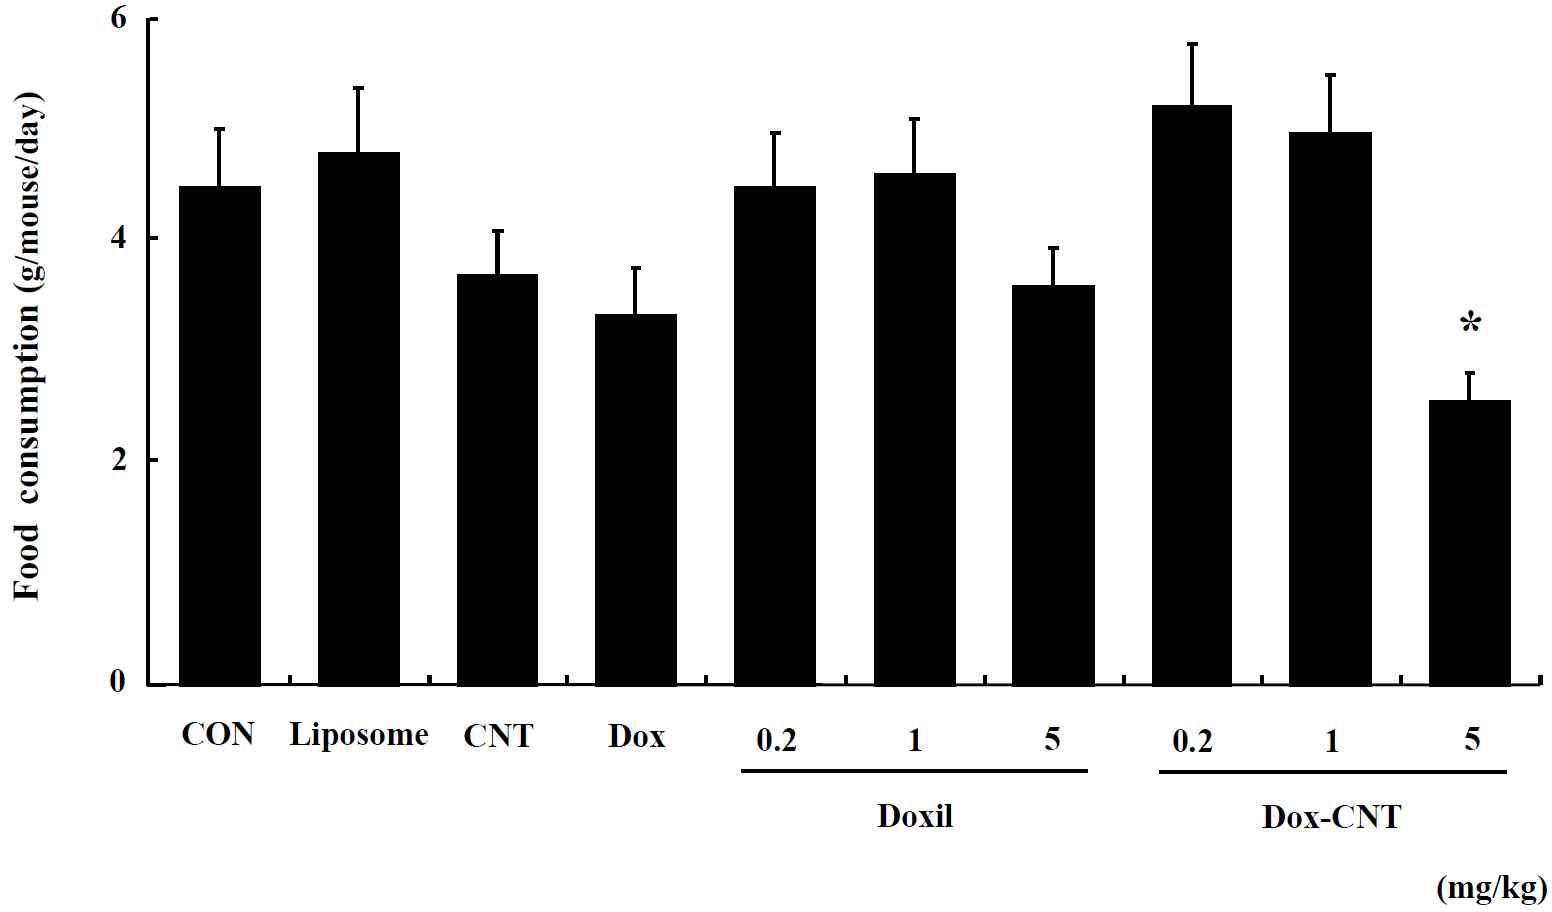 The change of food consumption in male ICR mice for 14 days after repeated exposure. Mice were respectively administered by intravenous injection with liposome, CNT, Dox, Doxil (0.2, 1, 5 mg/kg) and Dox-CNT (0.2, 1, 5 mg/kg). The results are presented as mean ± SE (n = 10). * p < 0.05, significantly different from the control.